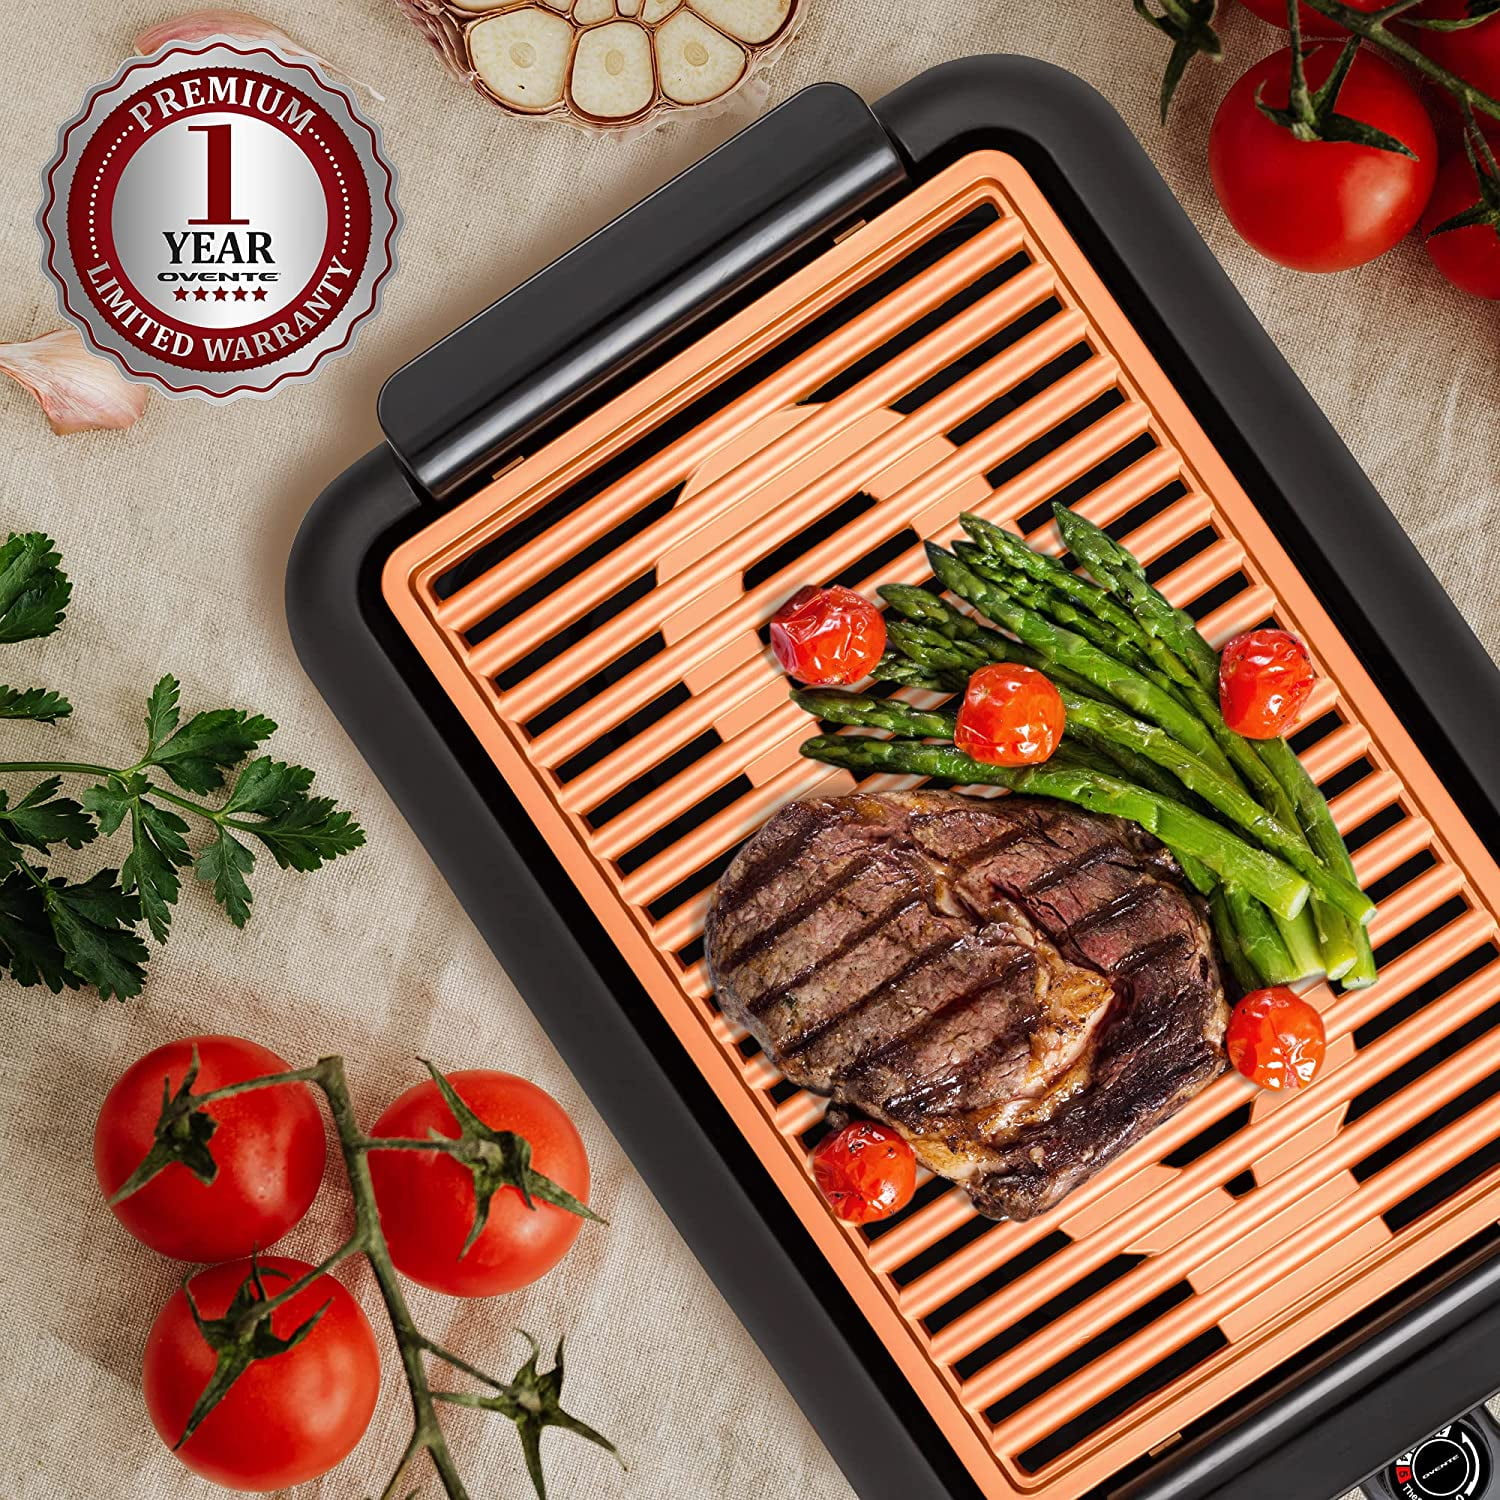  Elite Gourmet EMG1100 Electric Indoor Nonstick Grill,  Dishwasher Safe, Cool Touch, Fast Heat Up Ideal Low-Fat Meals, Includes  Tempered Glass Lid, 11, Black: Home & Kitchen